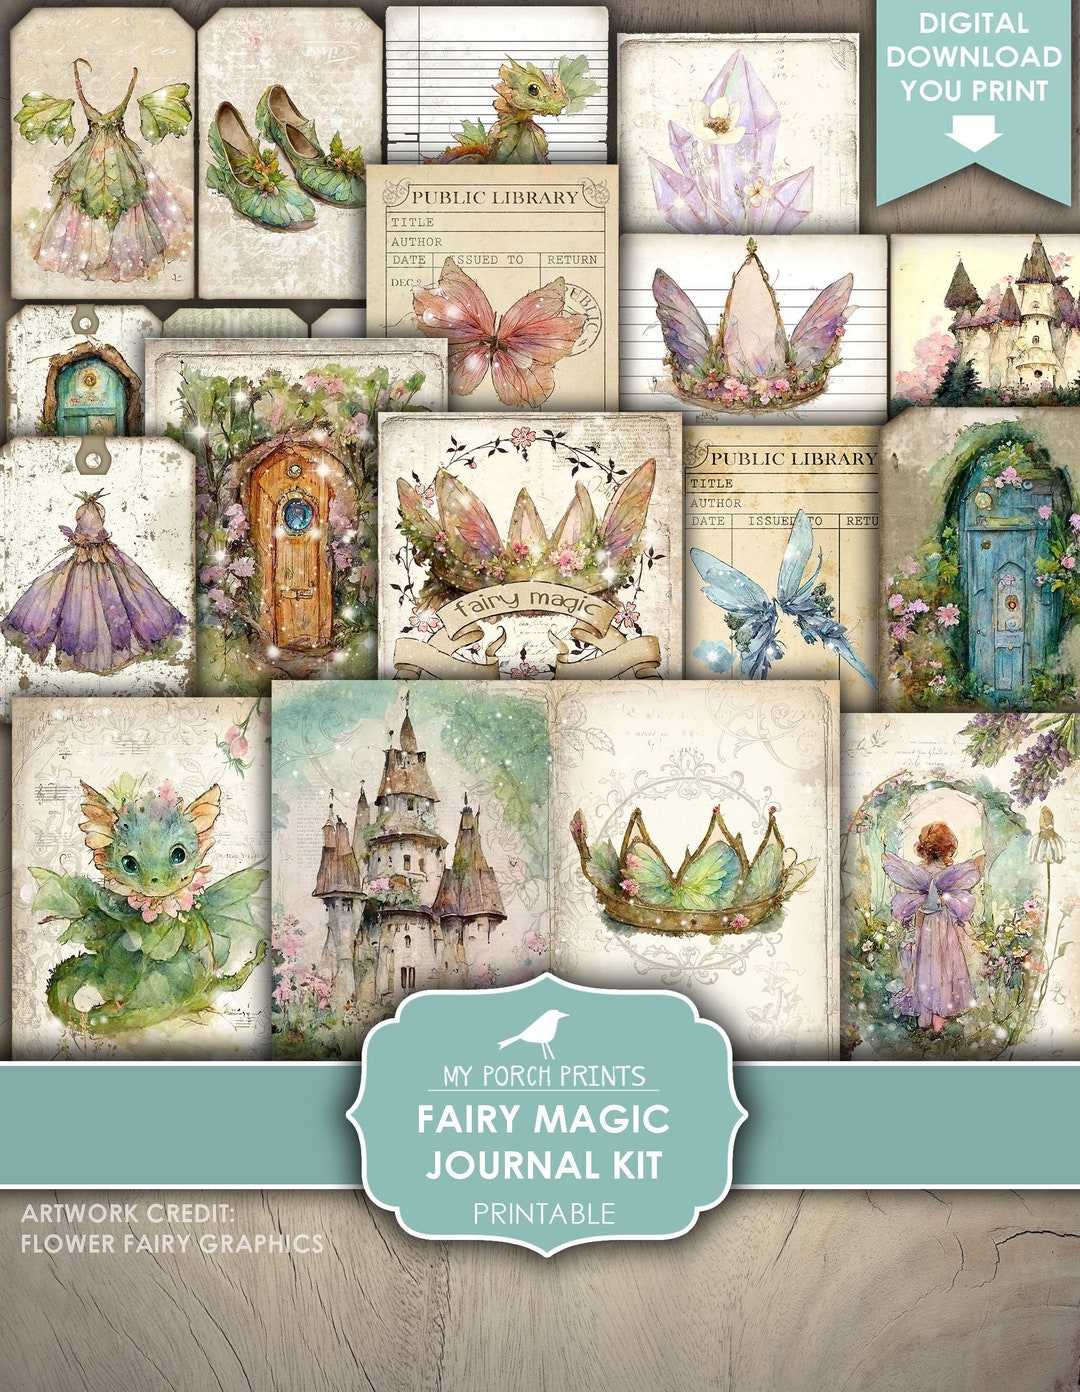 Fairy gone Fairy gone Vol. 2, Video software